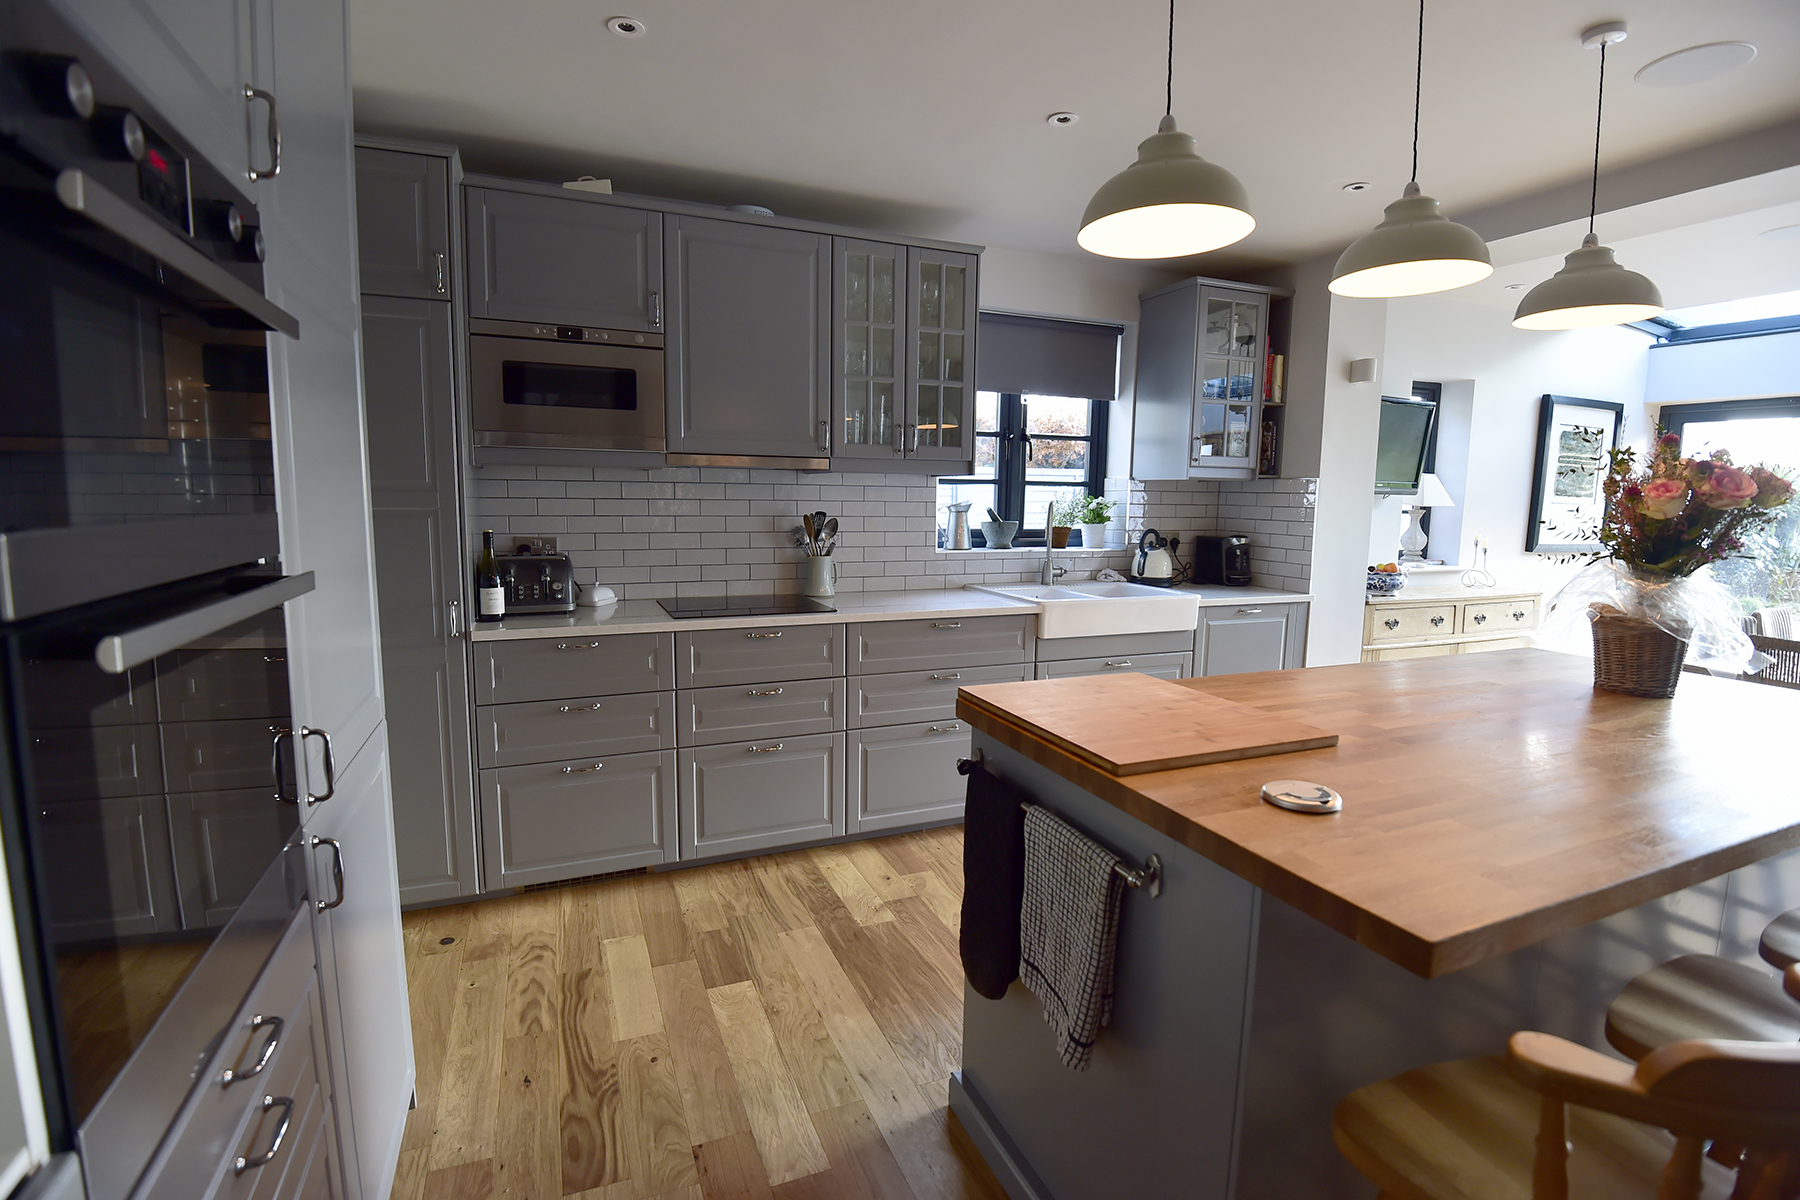 Kitchen Interior Design in Berkhamsted, Hertfordshire by Sarah Maidment Interiors, Brighton, Hove and East Sussex